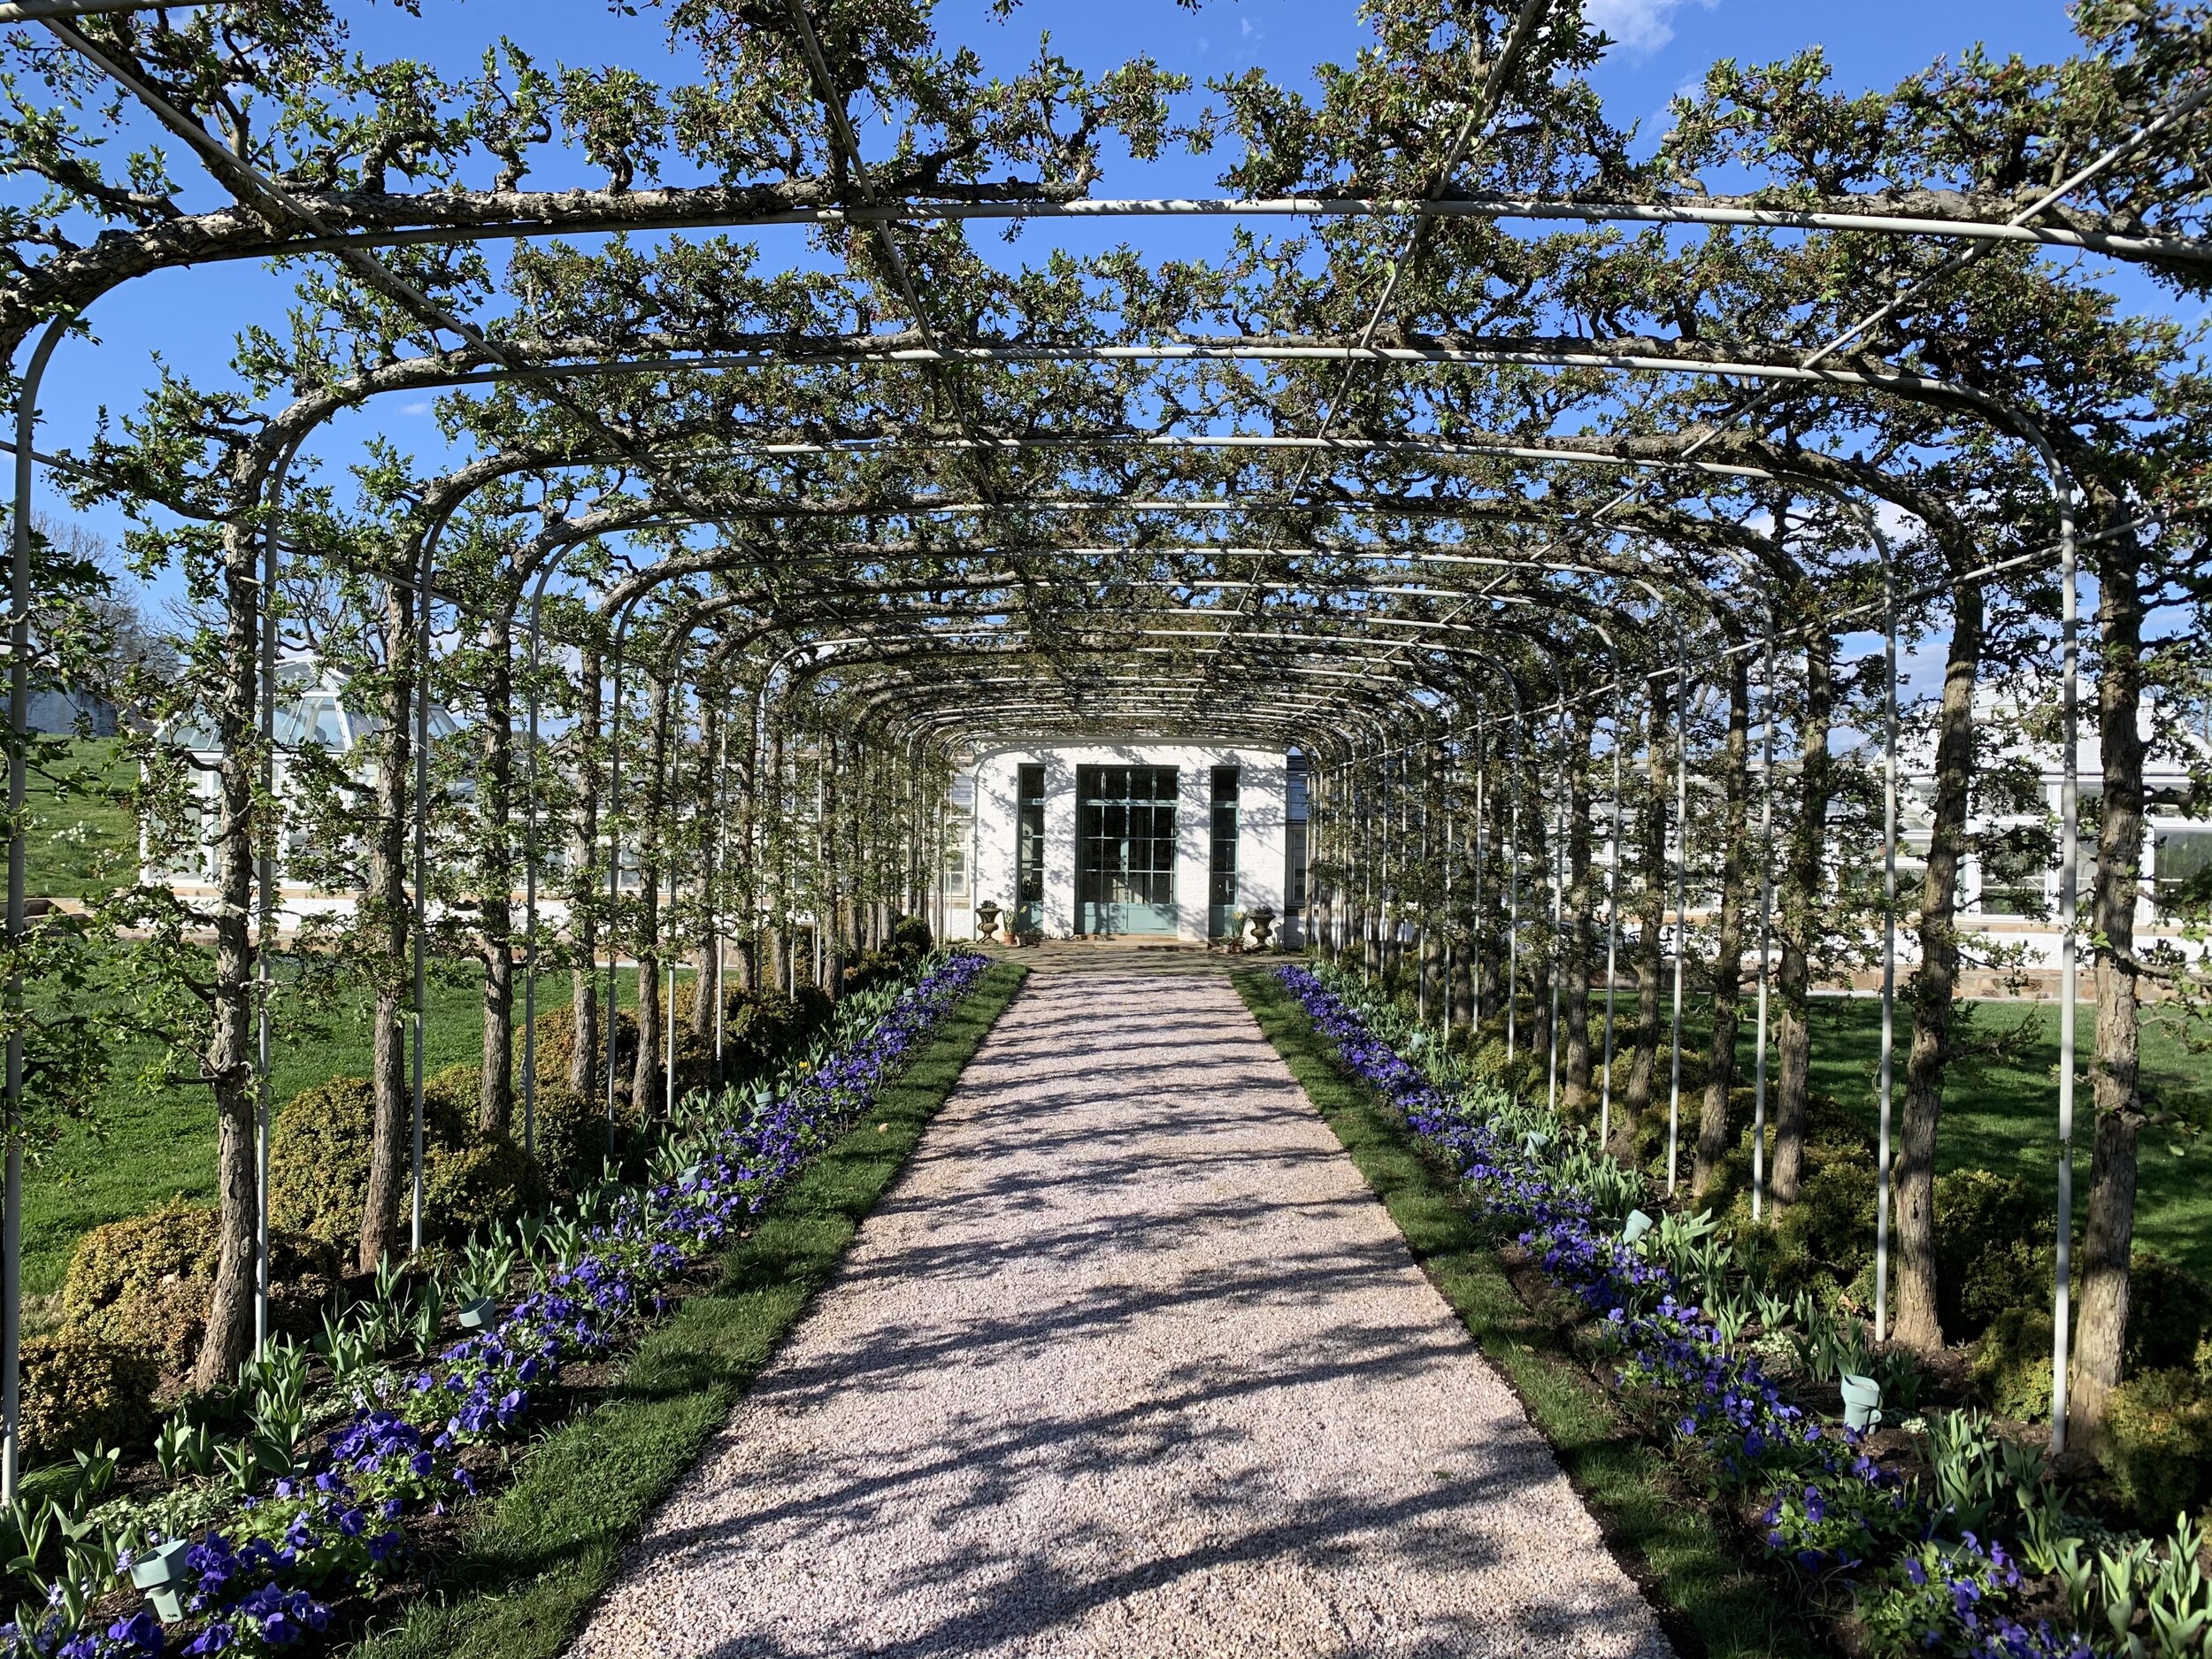  The allee of Mary Potter crabapple trees is beginning to bud. The beds are planted with  Viola x wittrockiana  Matrix ‘True Blue’ pansies. 